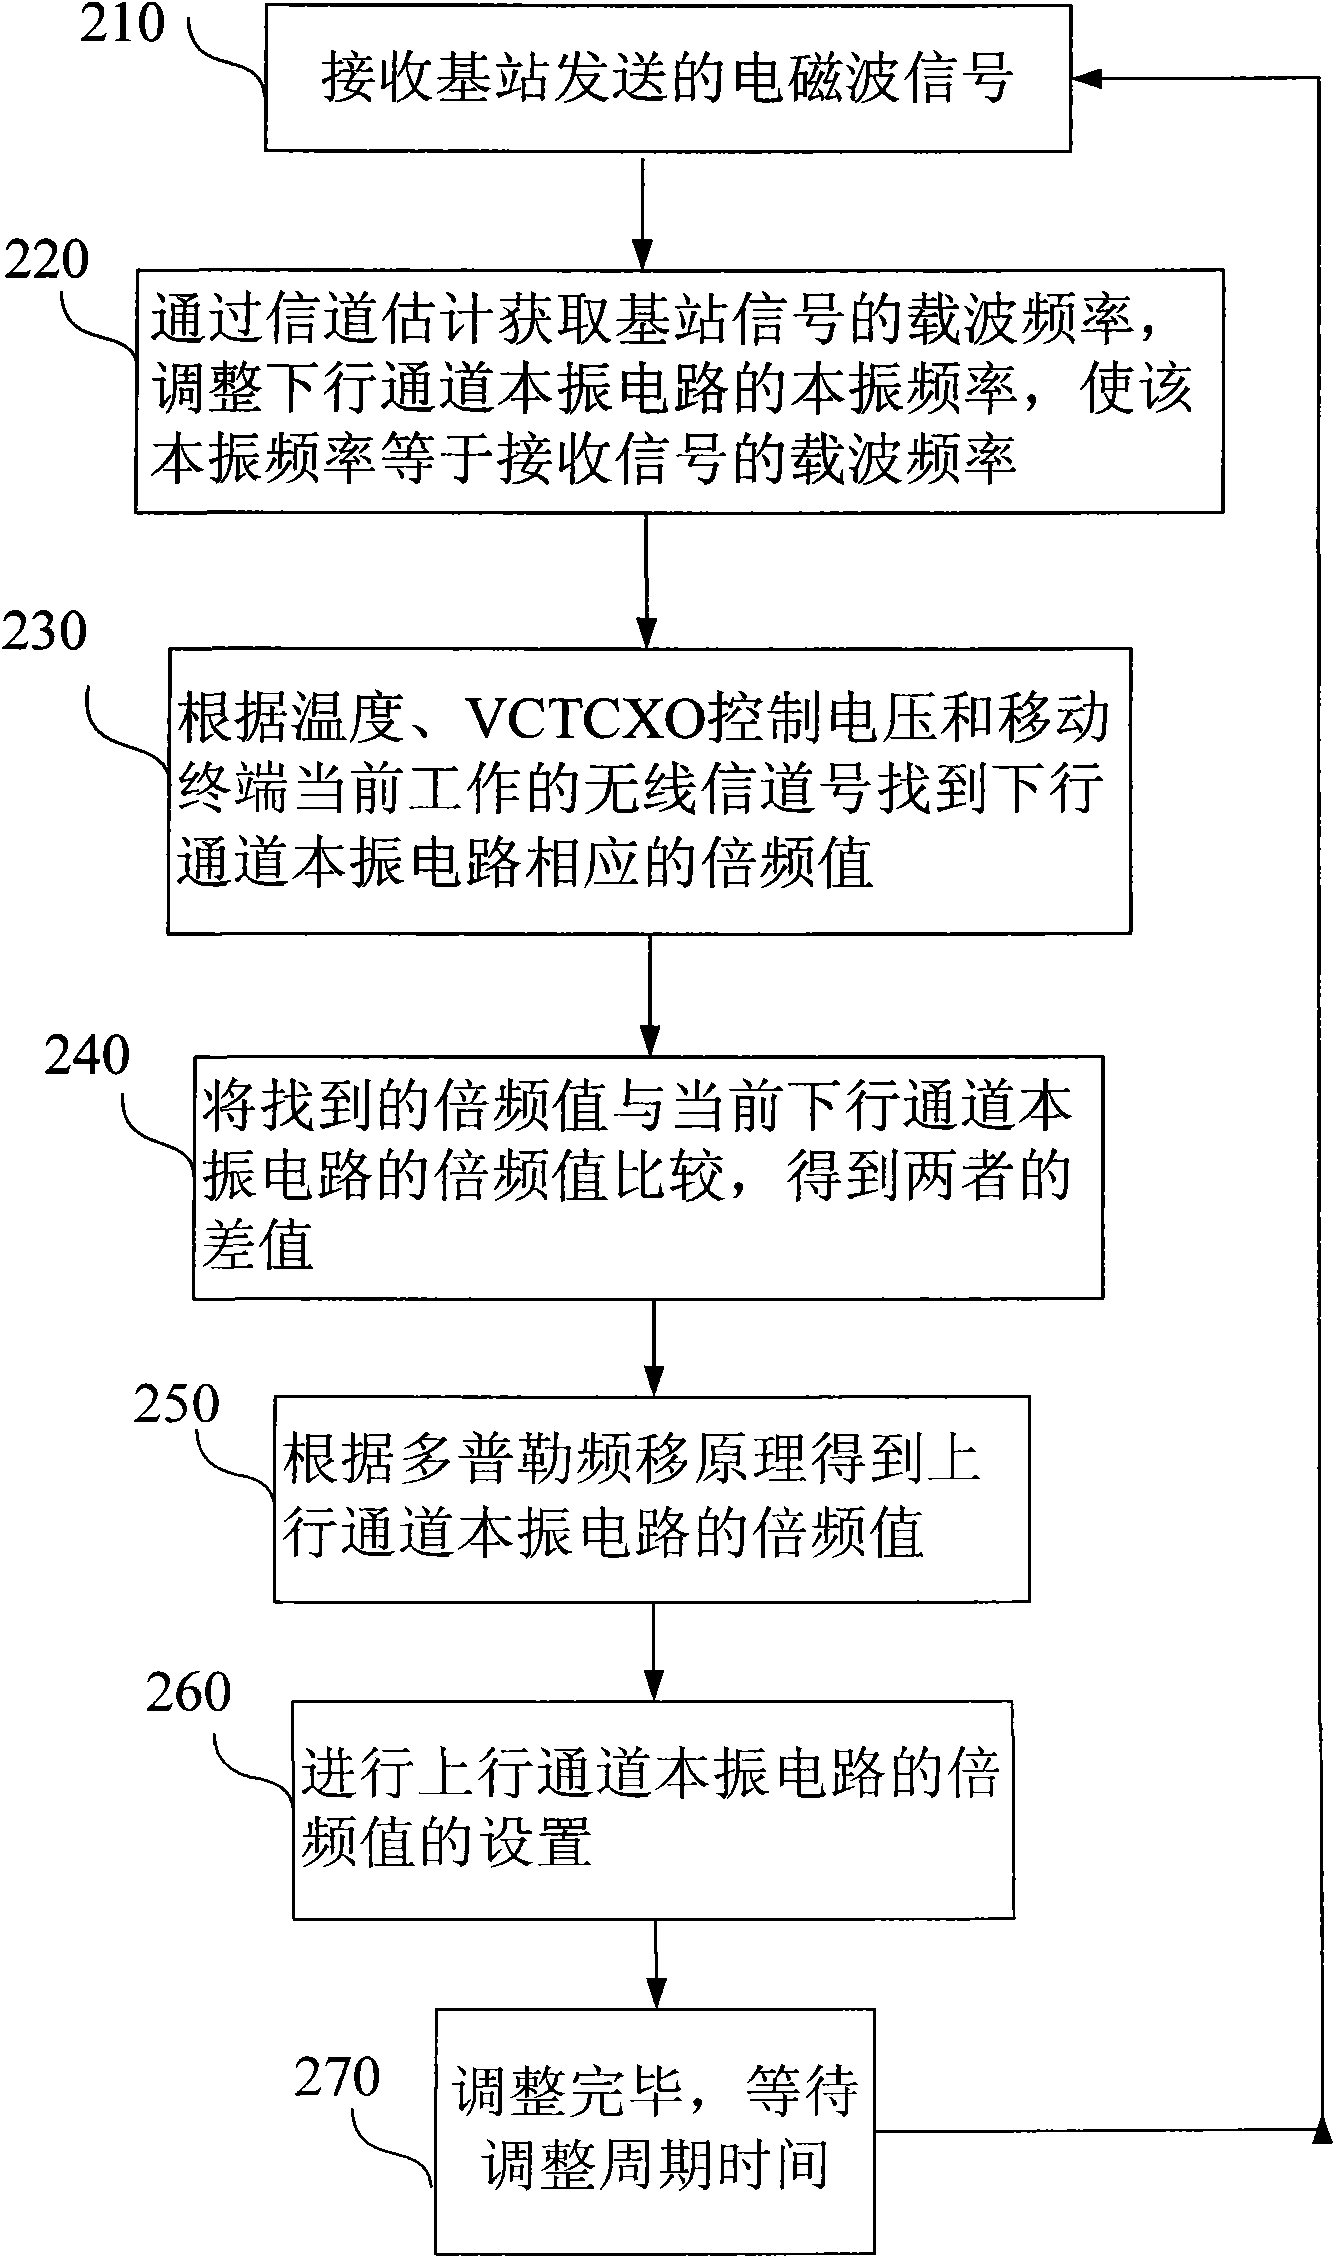 Mobile terminal and uplink channel local frequency regulation method